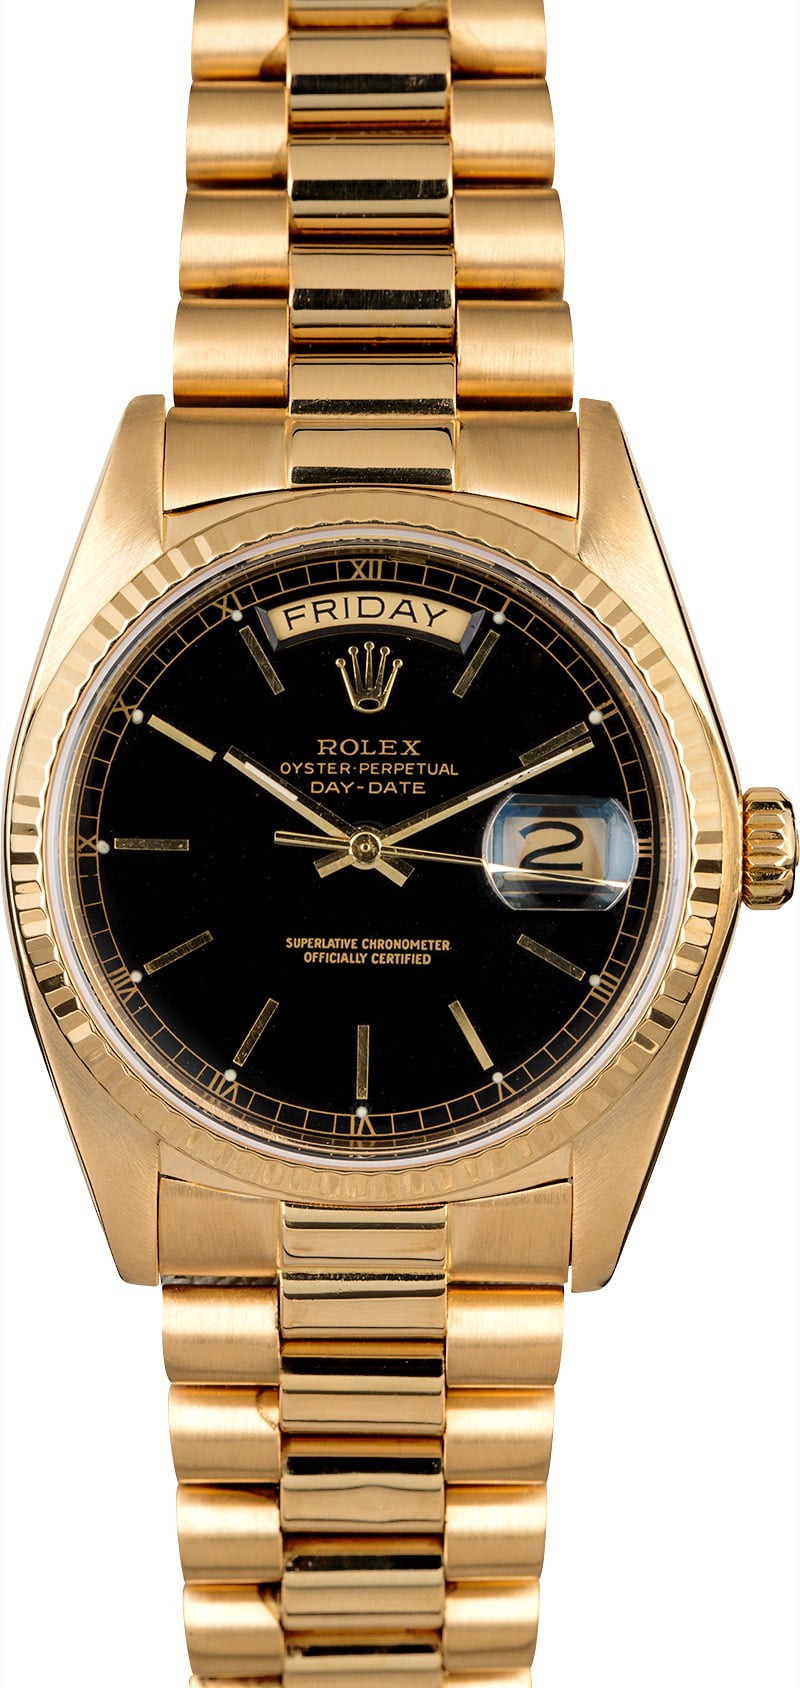 Imitation Rolex Day-Date 18038 President Black Dial WE00666